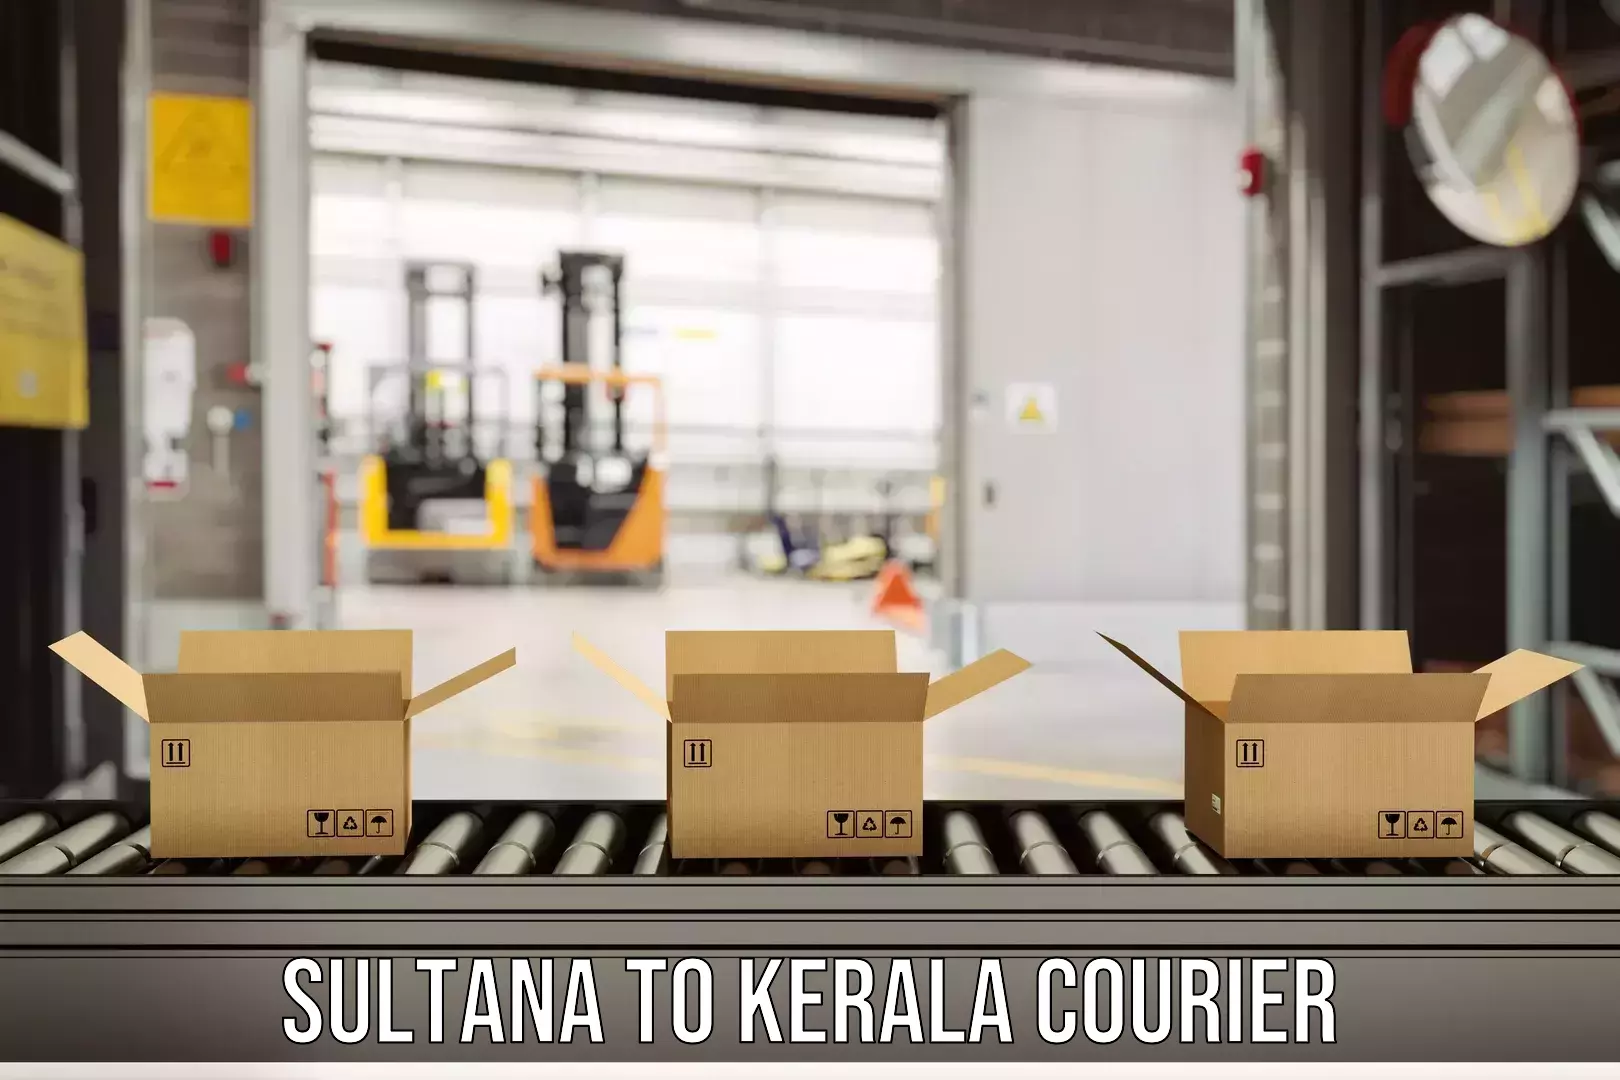 End-to-end delivery Sultana to Kerala